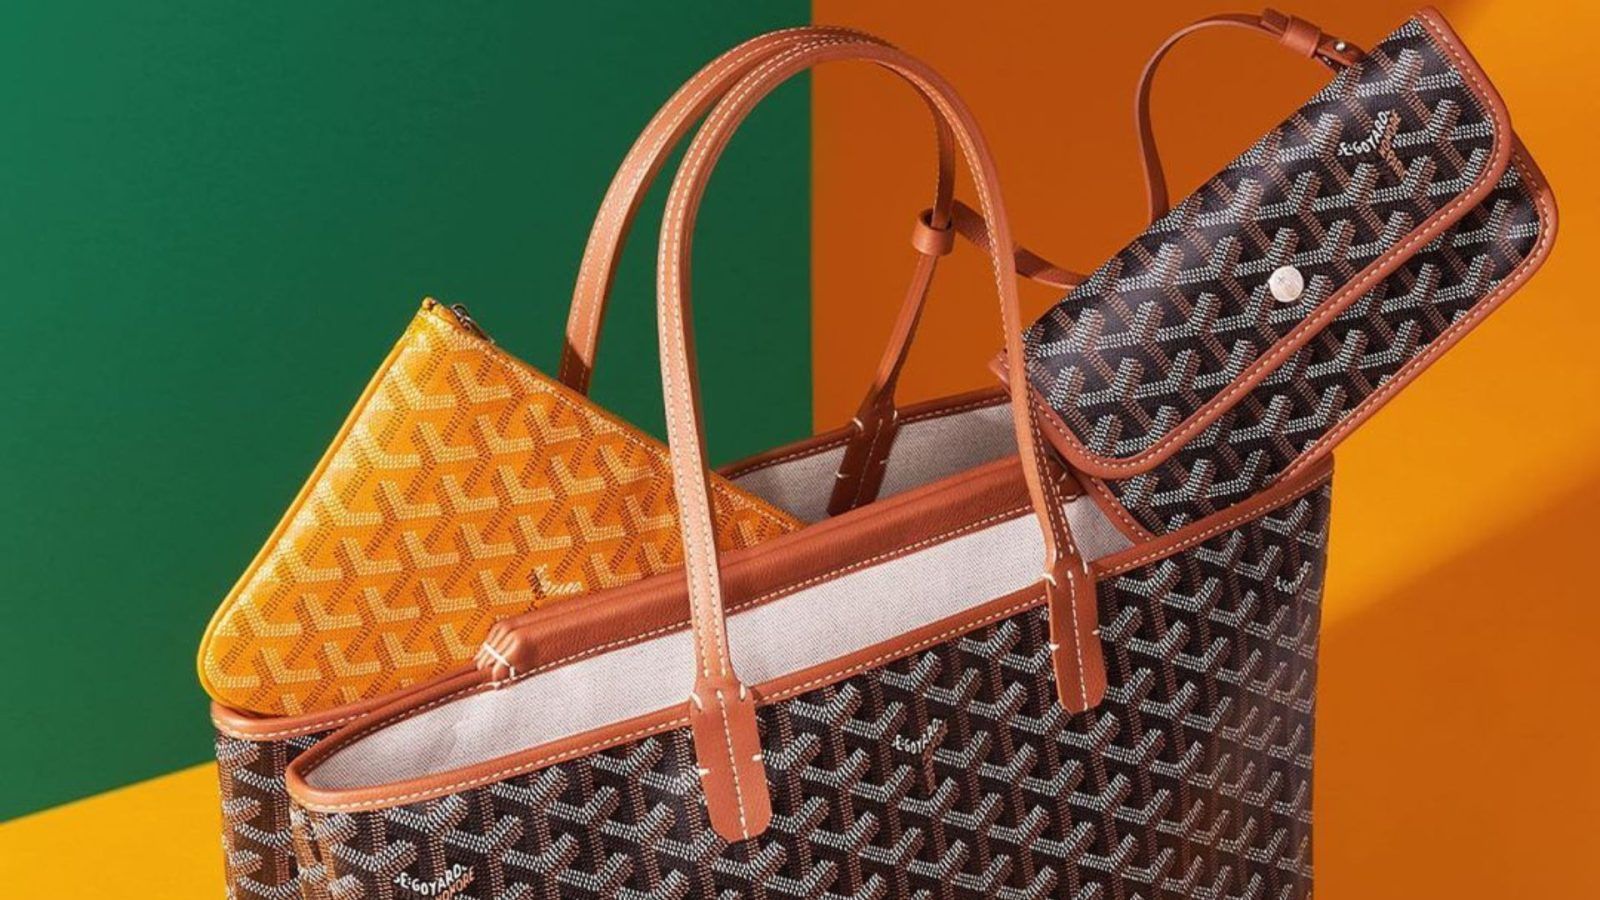 The workhorse luxury tote bag you should buy based on your zodiac